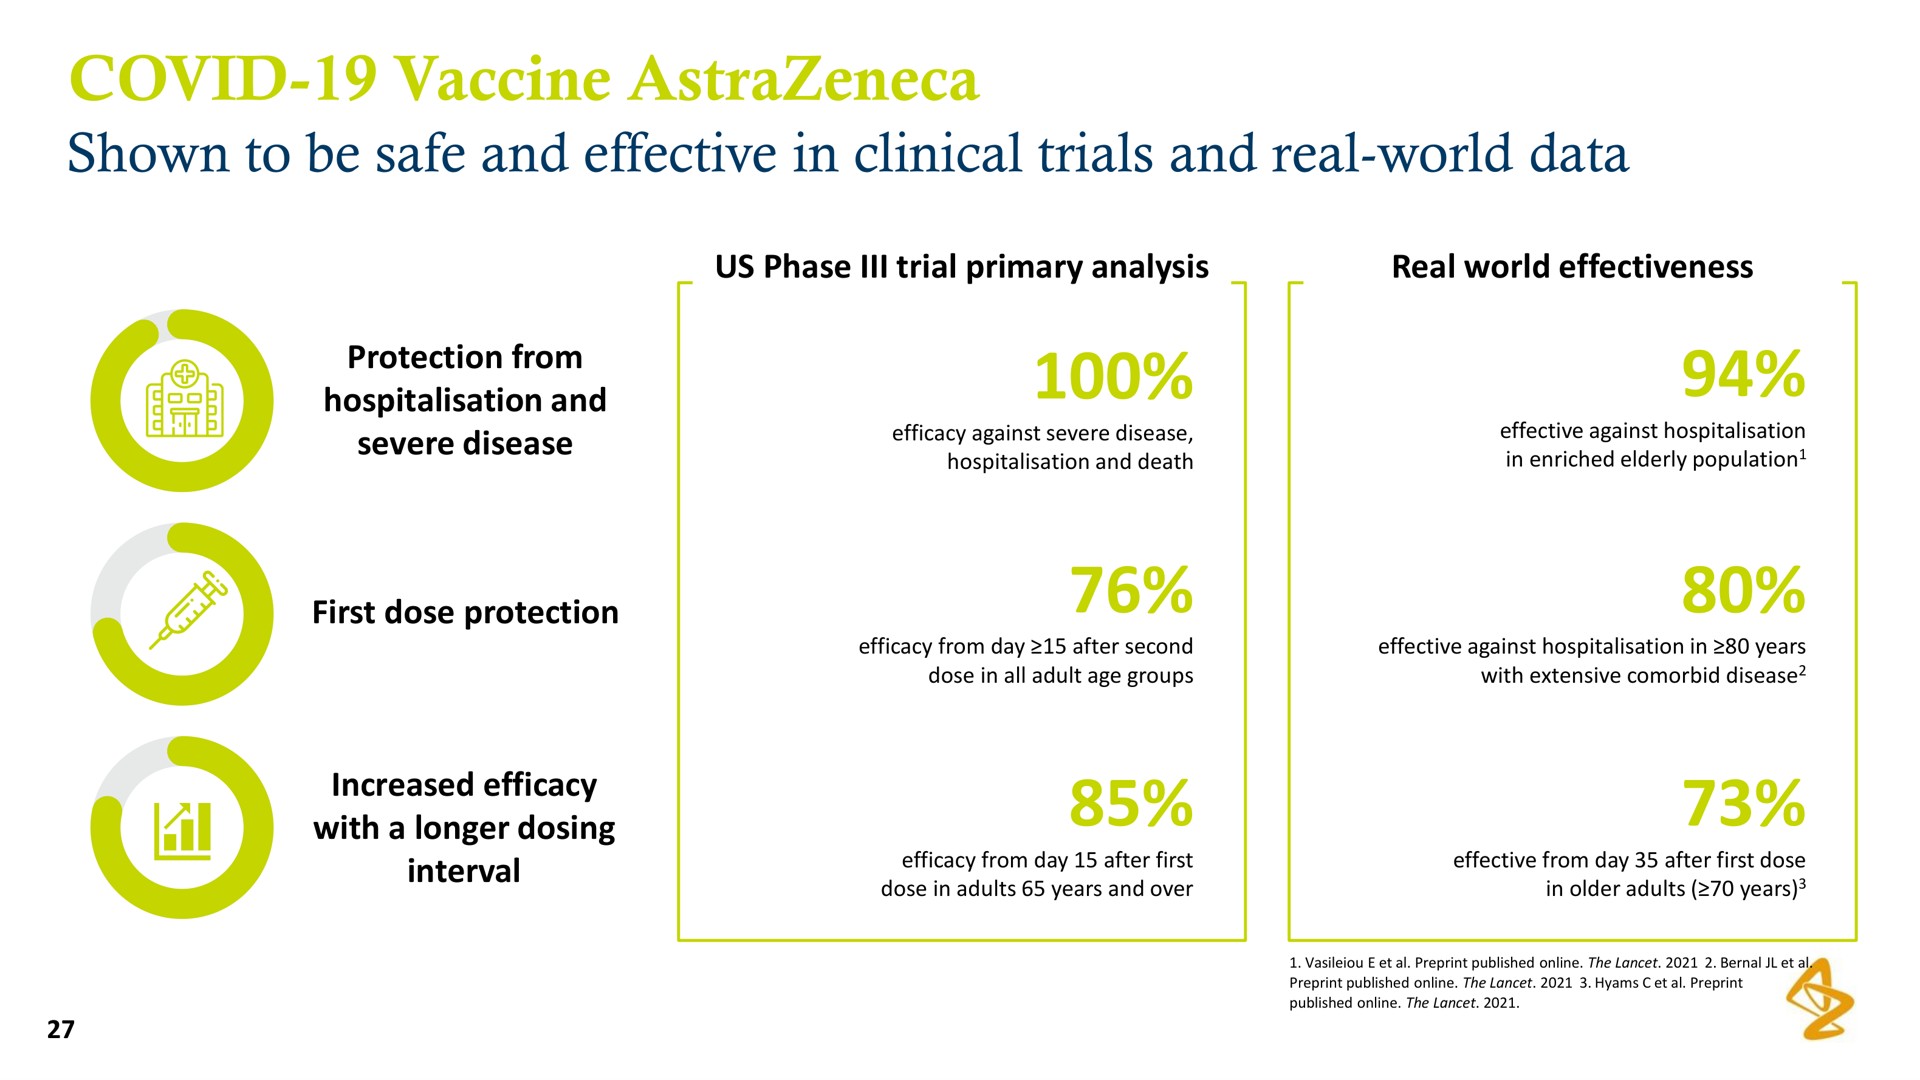 covid vaccine shown to be safe and effective in clinical trials and real world data | AstraZeneca